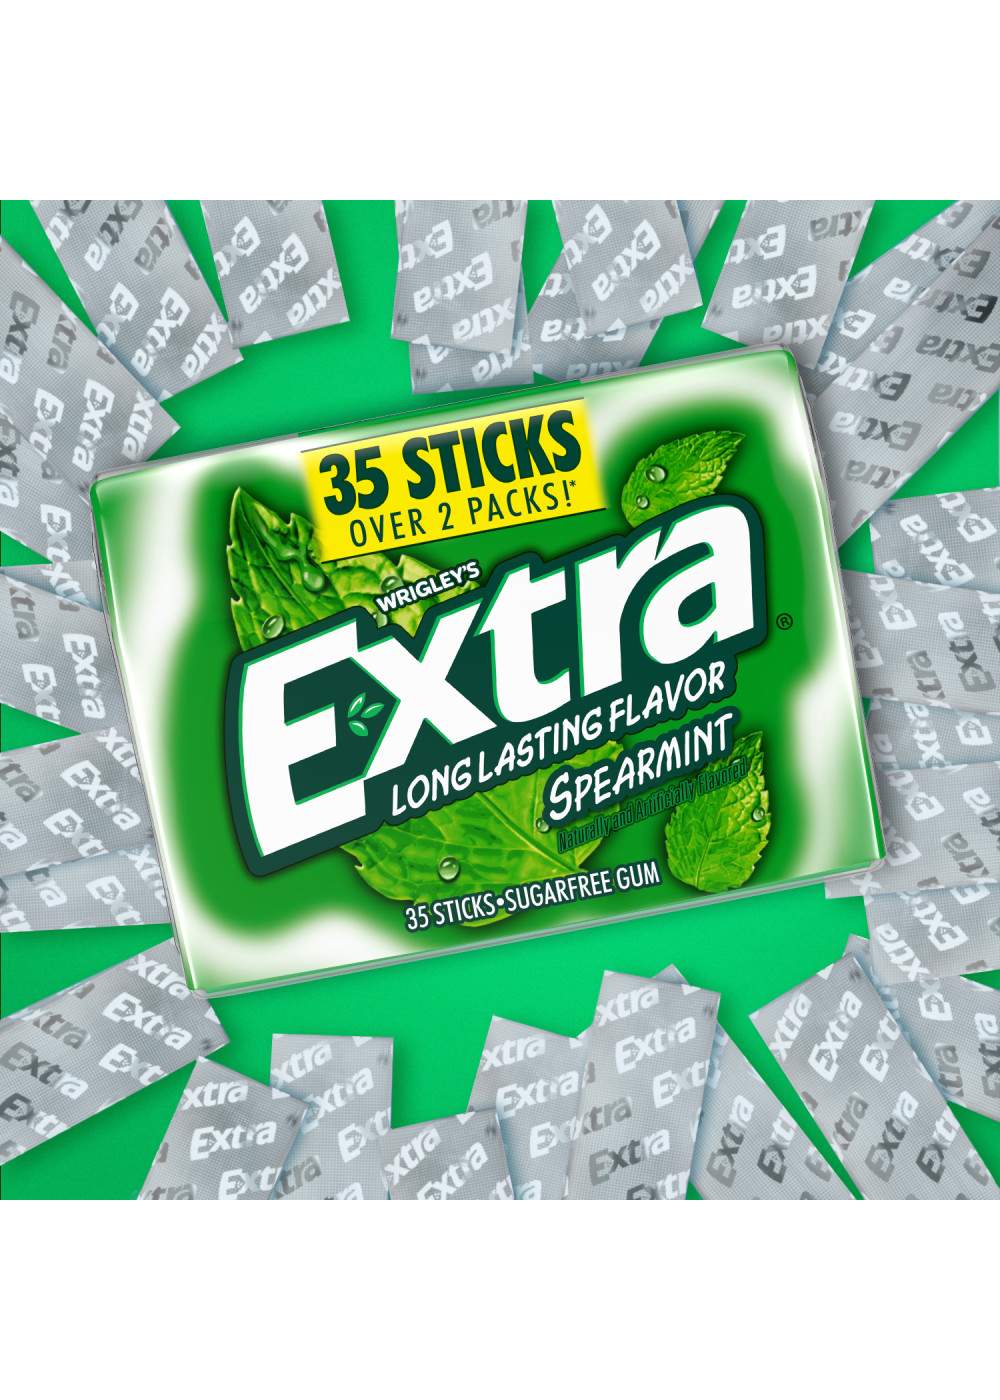 Extra Spearmint Sugar Free Chewing Gum; image 6 of 7